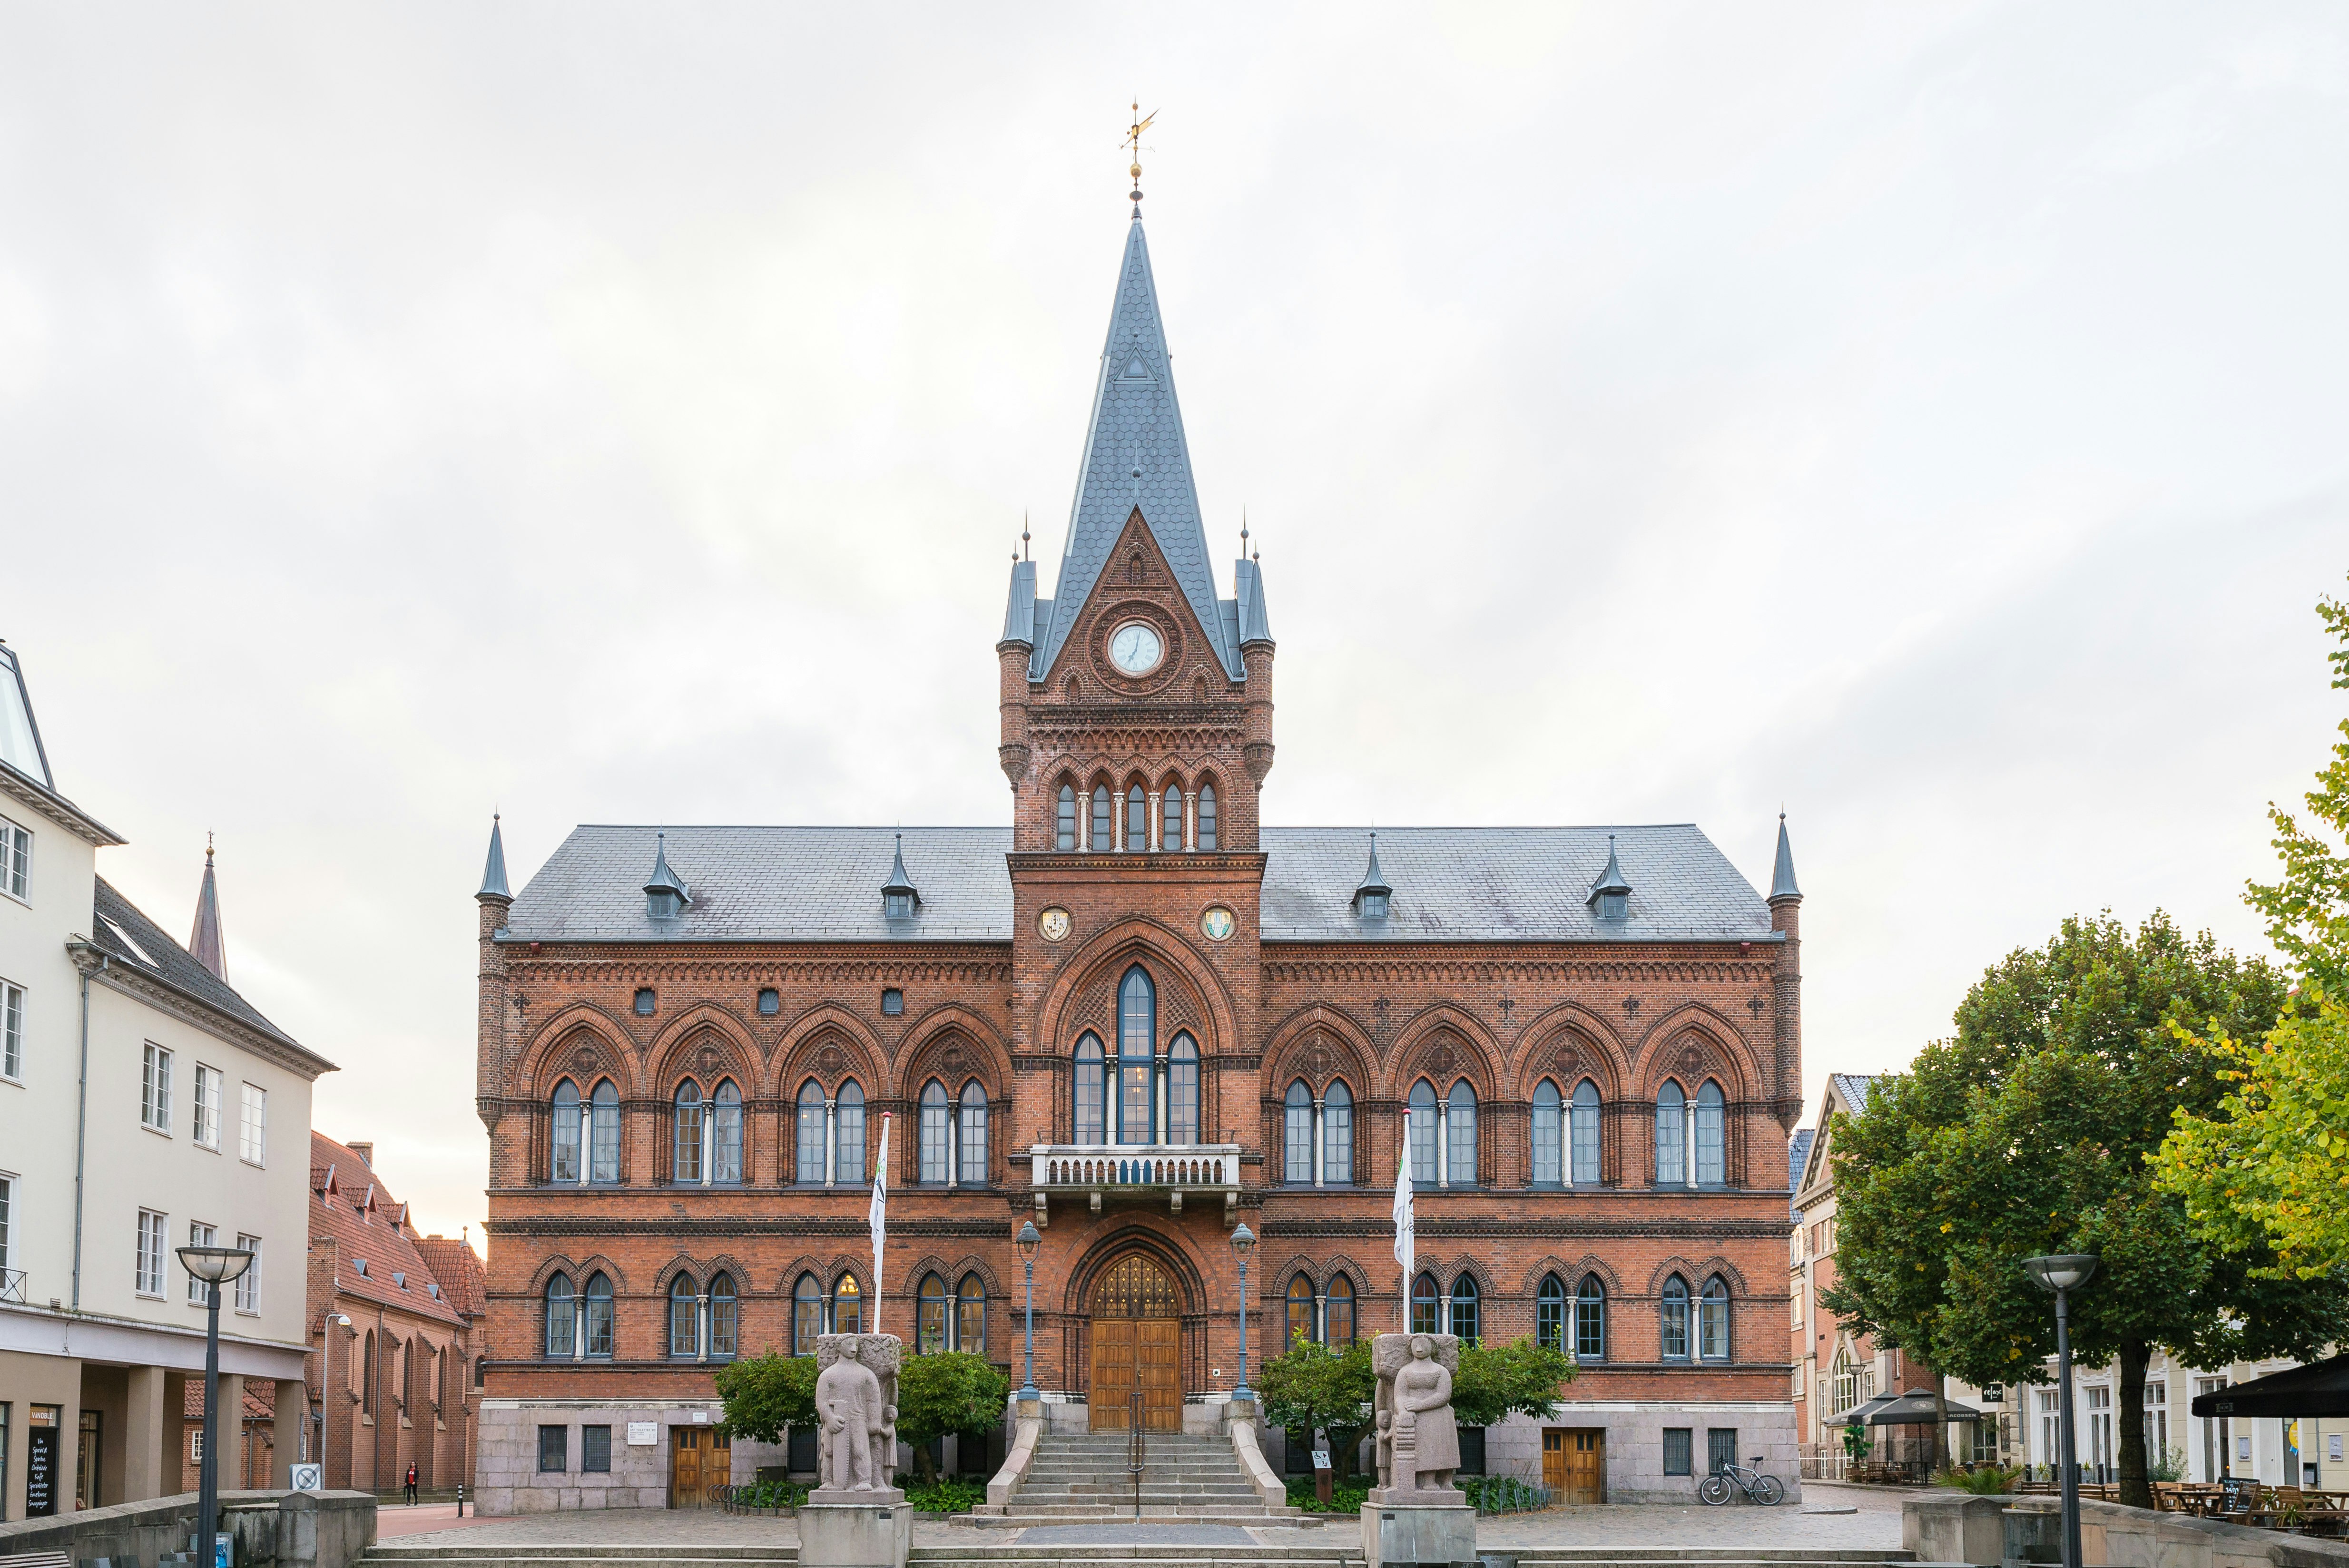 The Gothic-style Town Hall in Vejle, Denmark